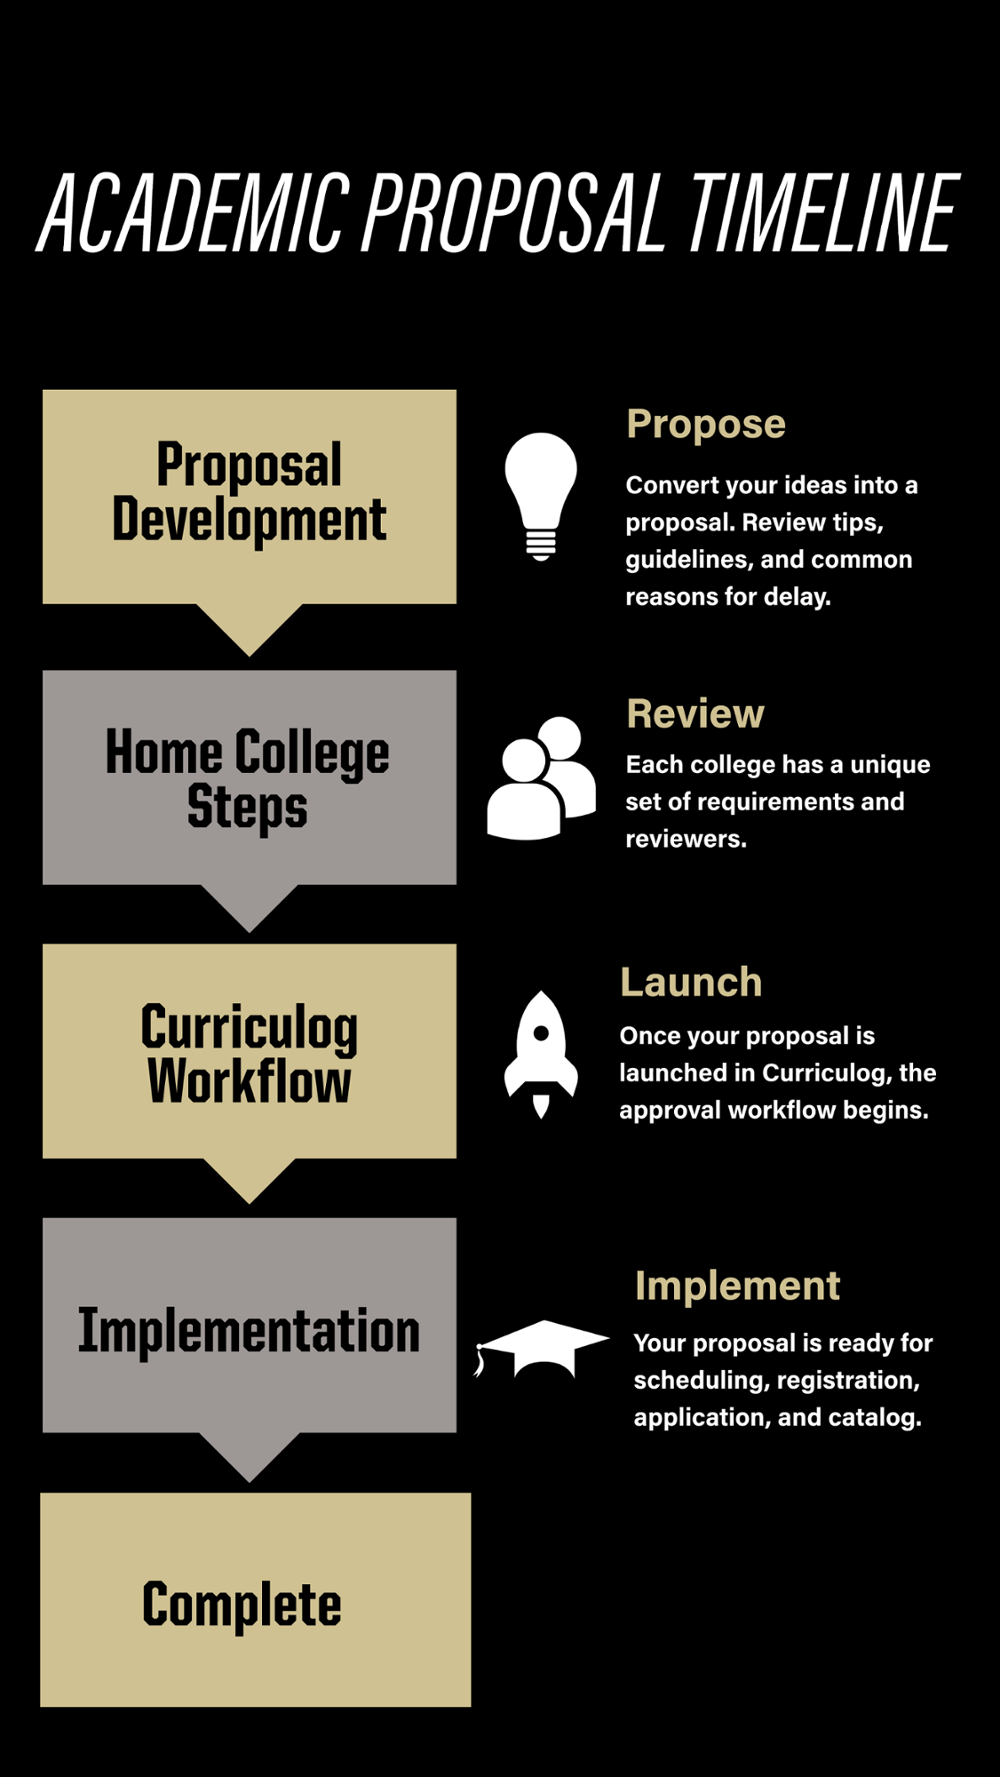 Image describing workflow process. All proposals follow a four-step workflow: Proposal Development, Home College Steps, Curriculog Workflow, and Implementation.